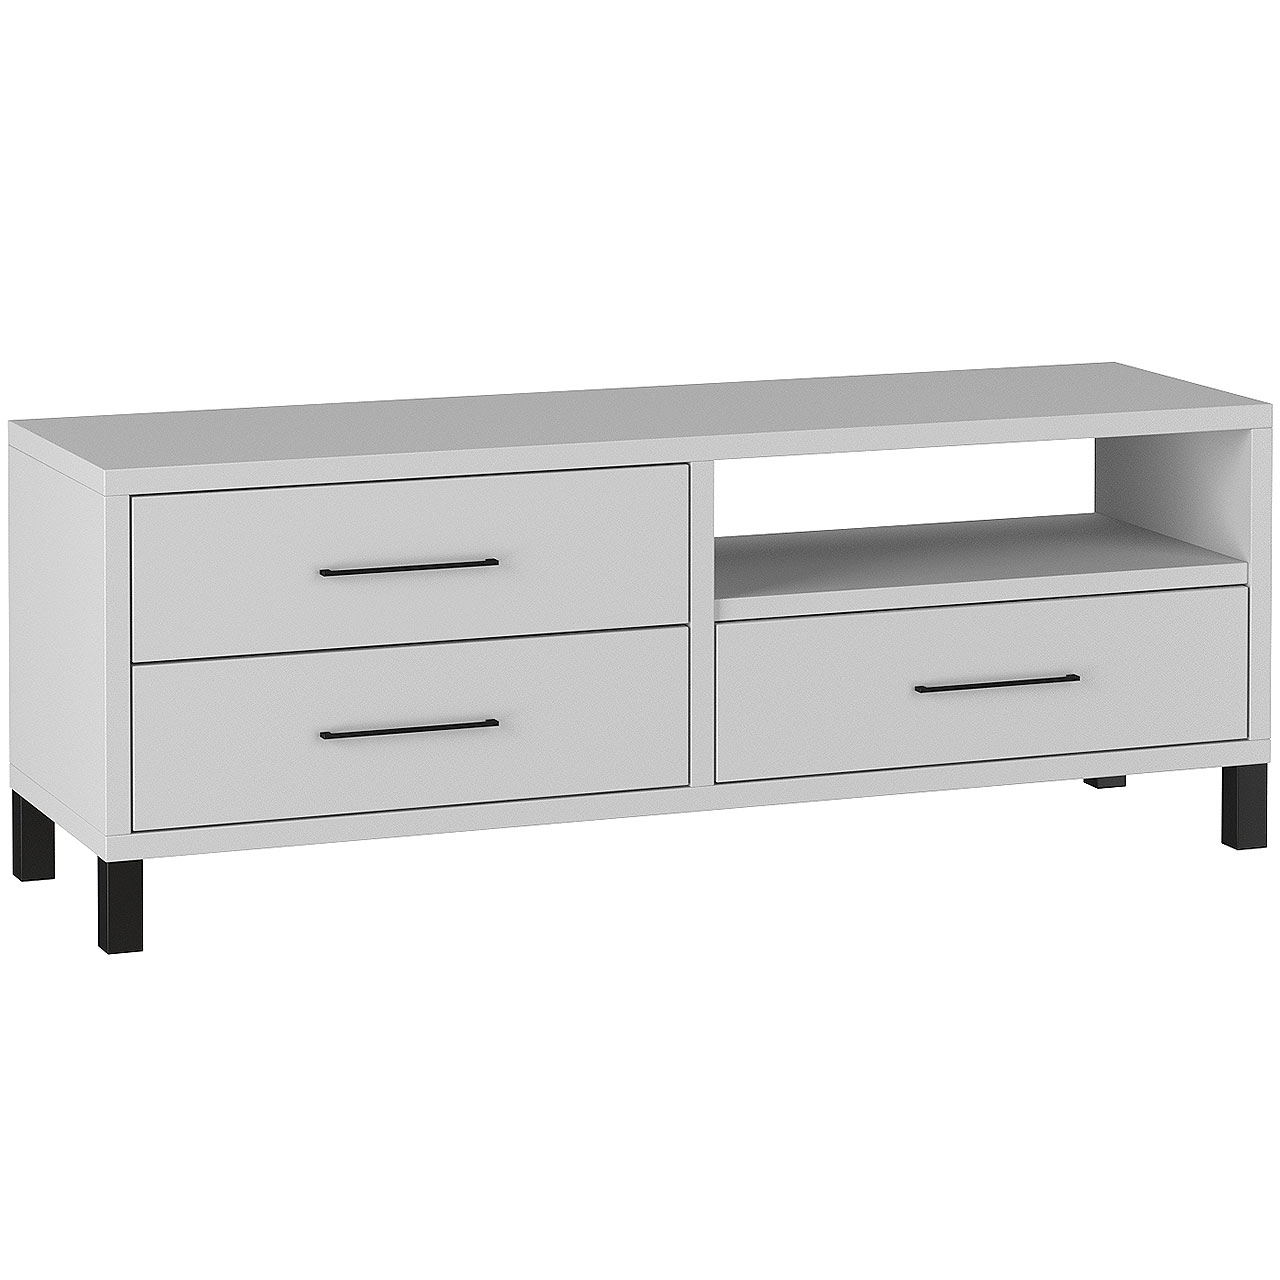 TV Stand ROMA 3S grey